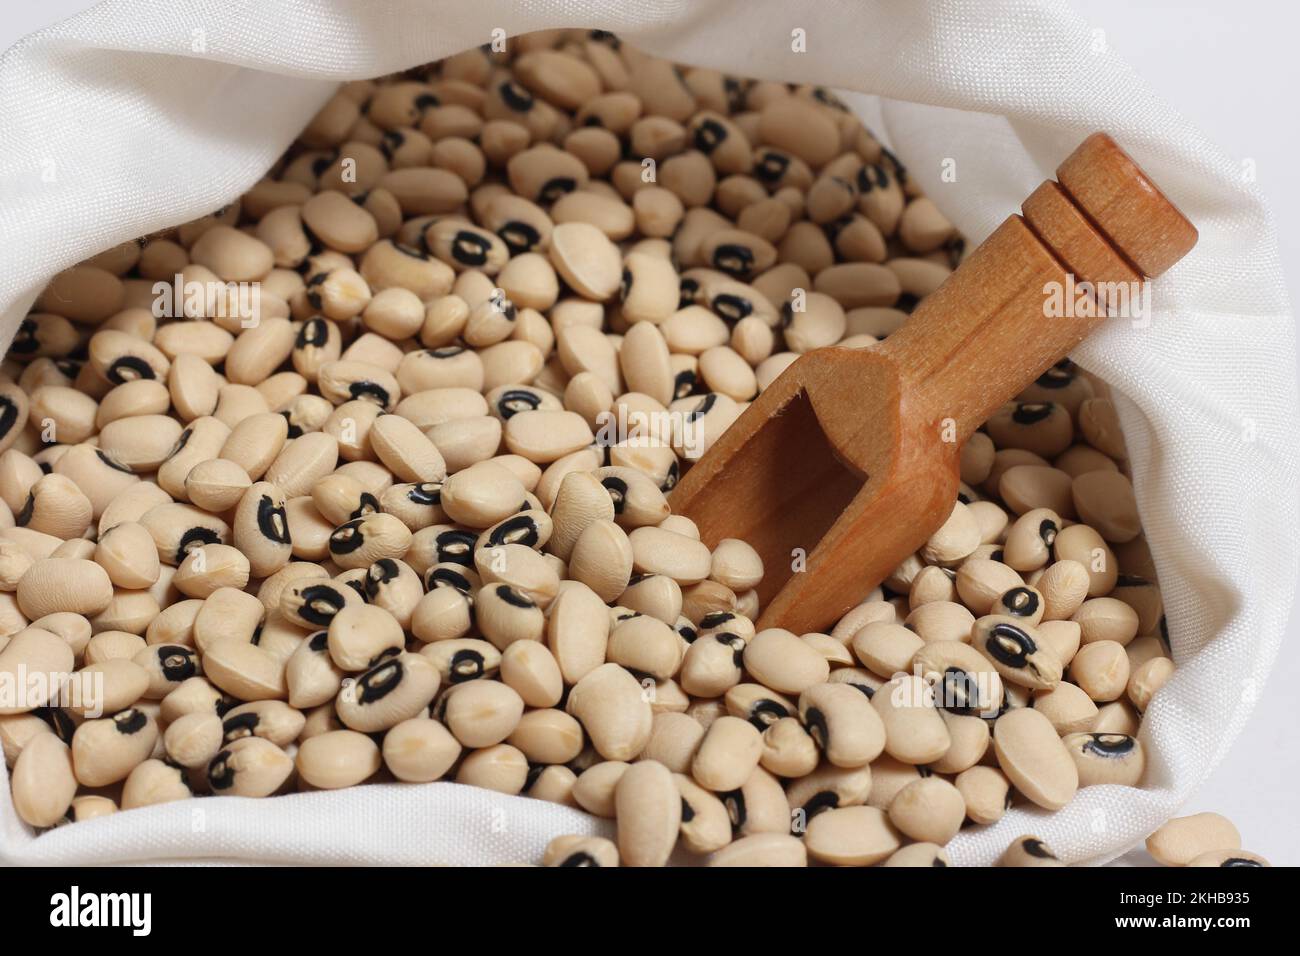 Uncooked Dried Black Eyed Peas in Bag With Wooden Scoop Stock Photo